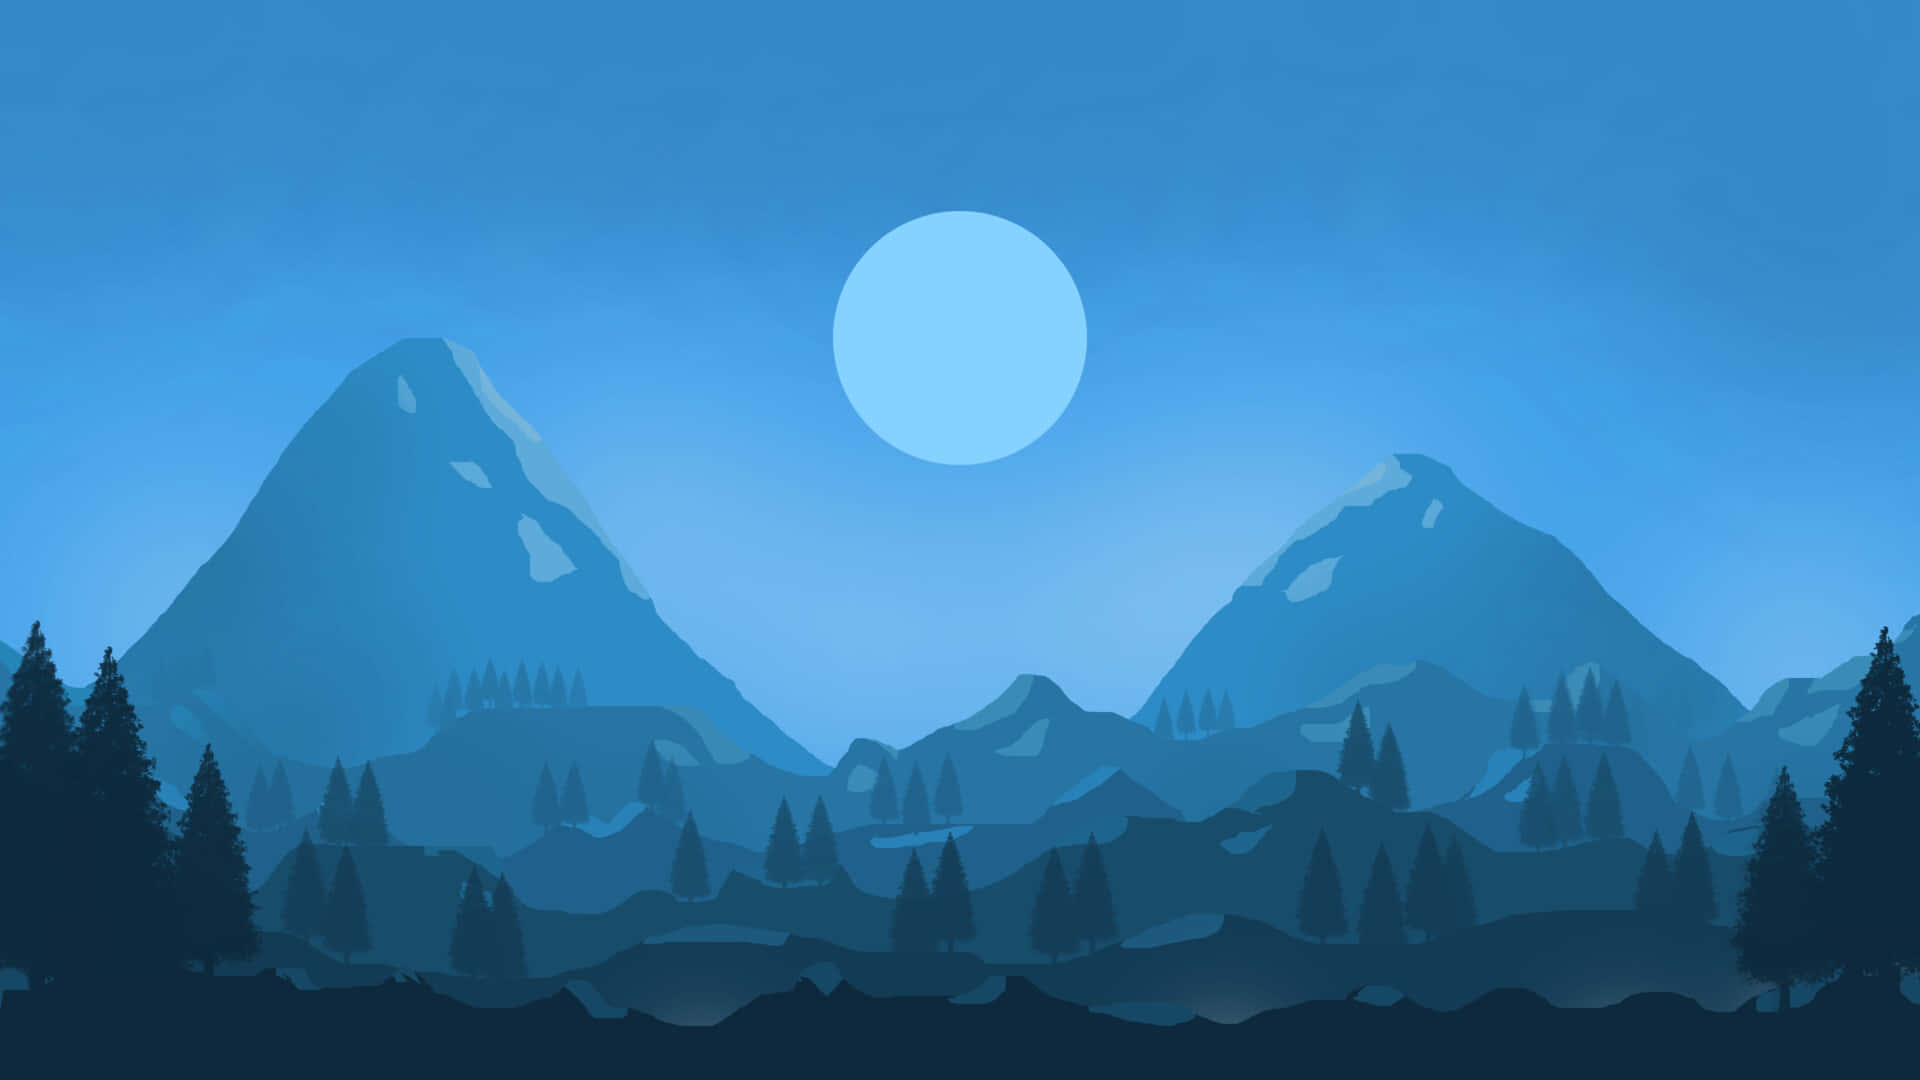 A Mountain Landscape With A Moon And Trees